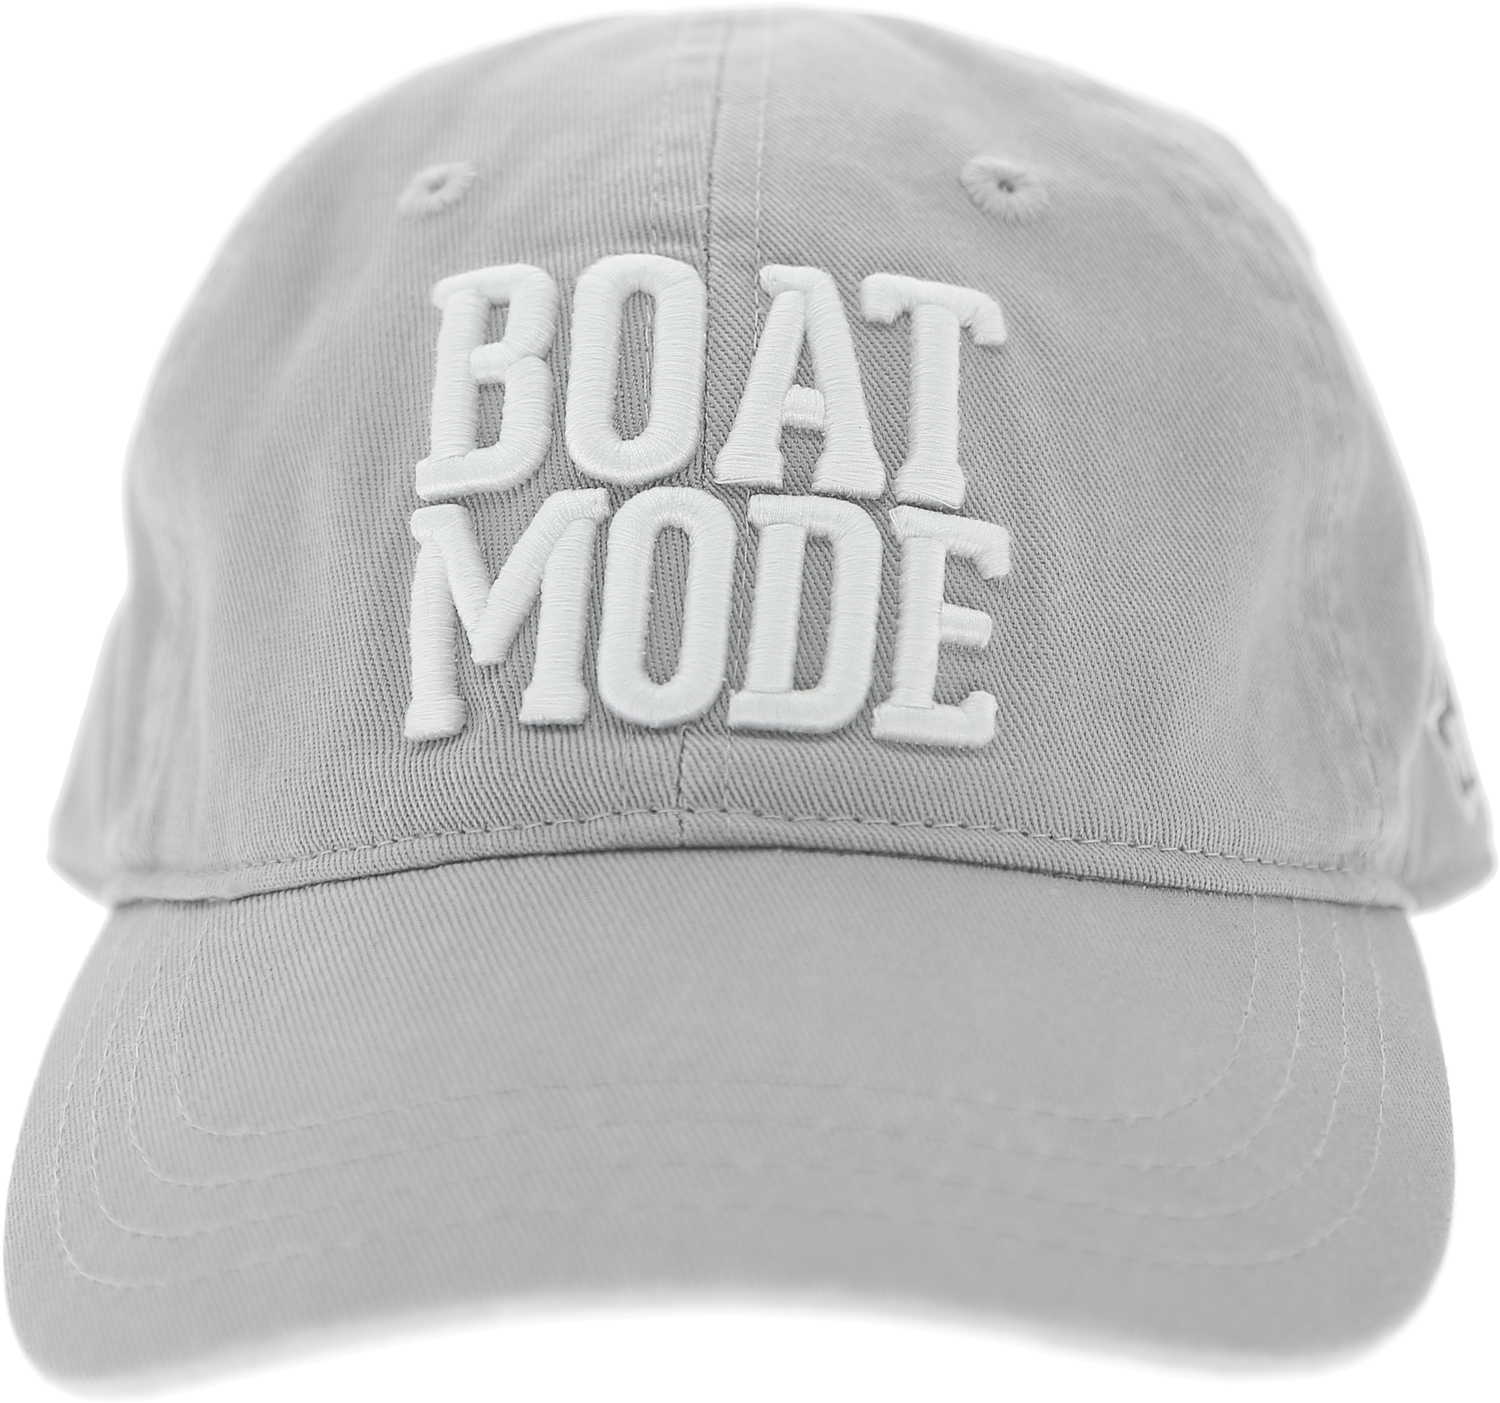 Boat Mode by We People - Boat Mode - Light Gray Adjustable Hat